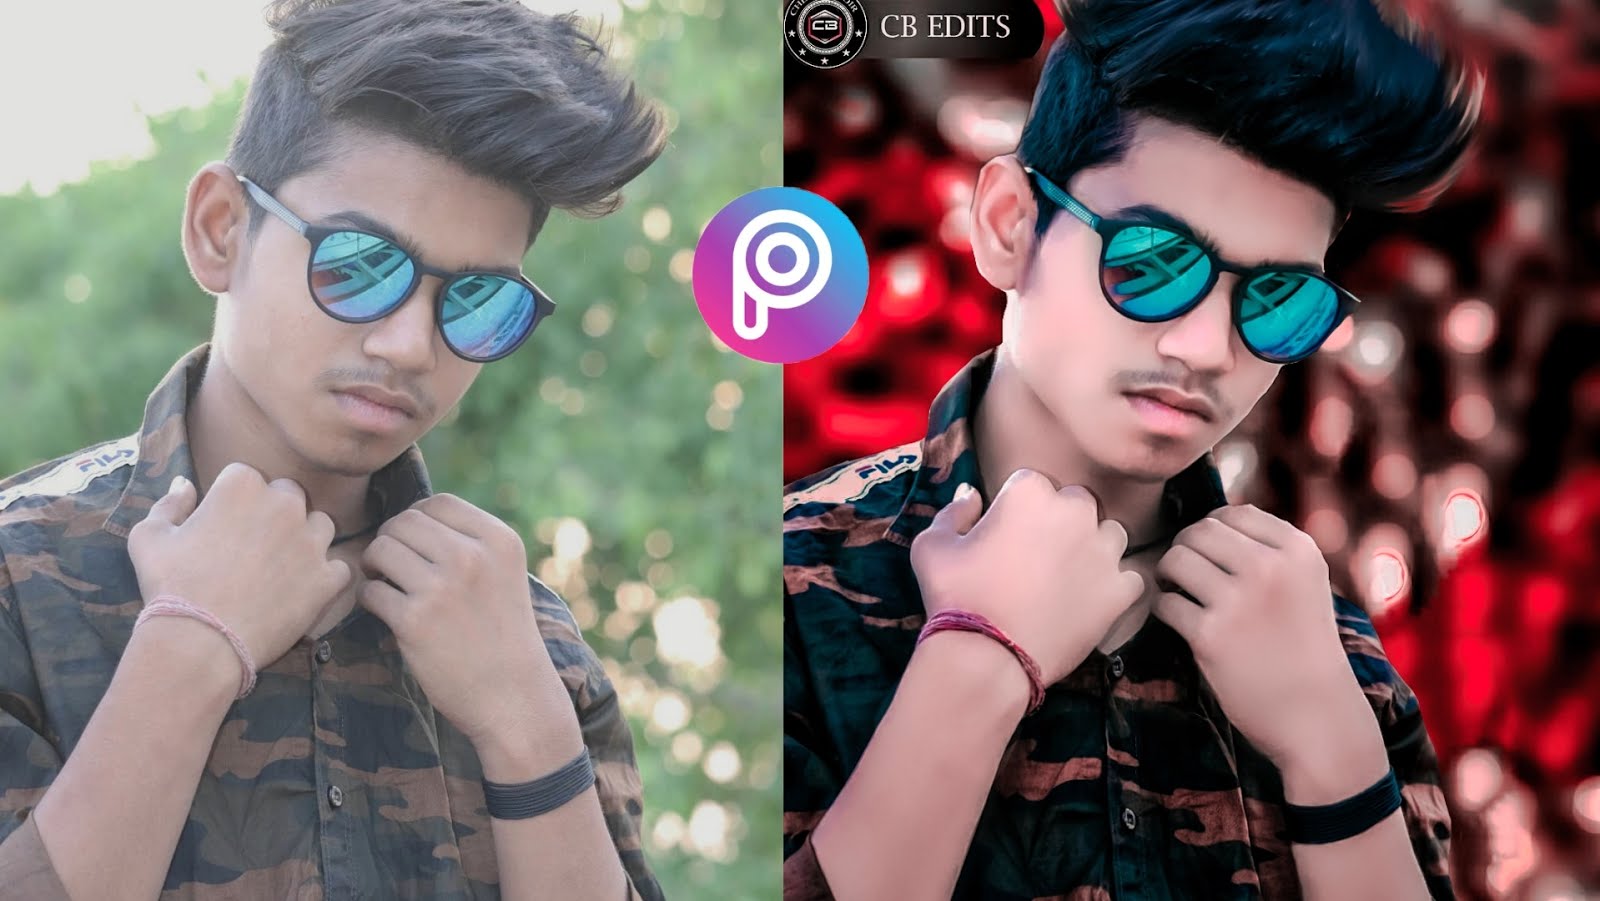 Cb editing background download 2020 - LEARNINGWITHSR